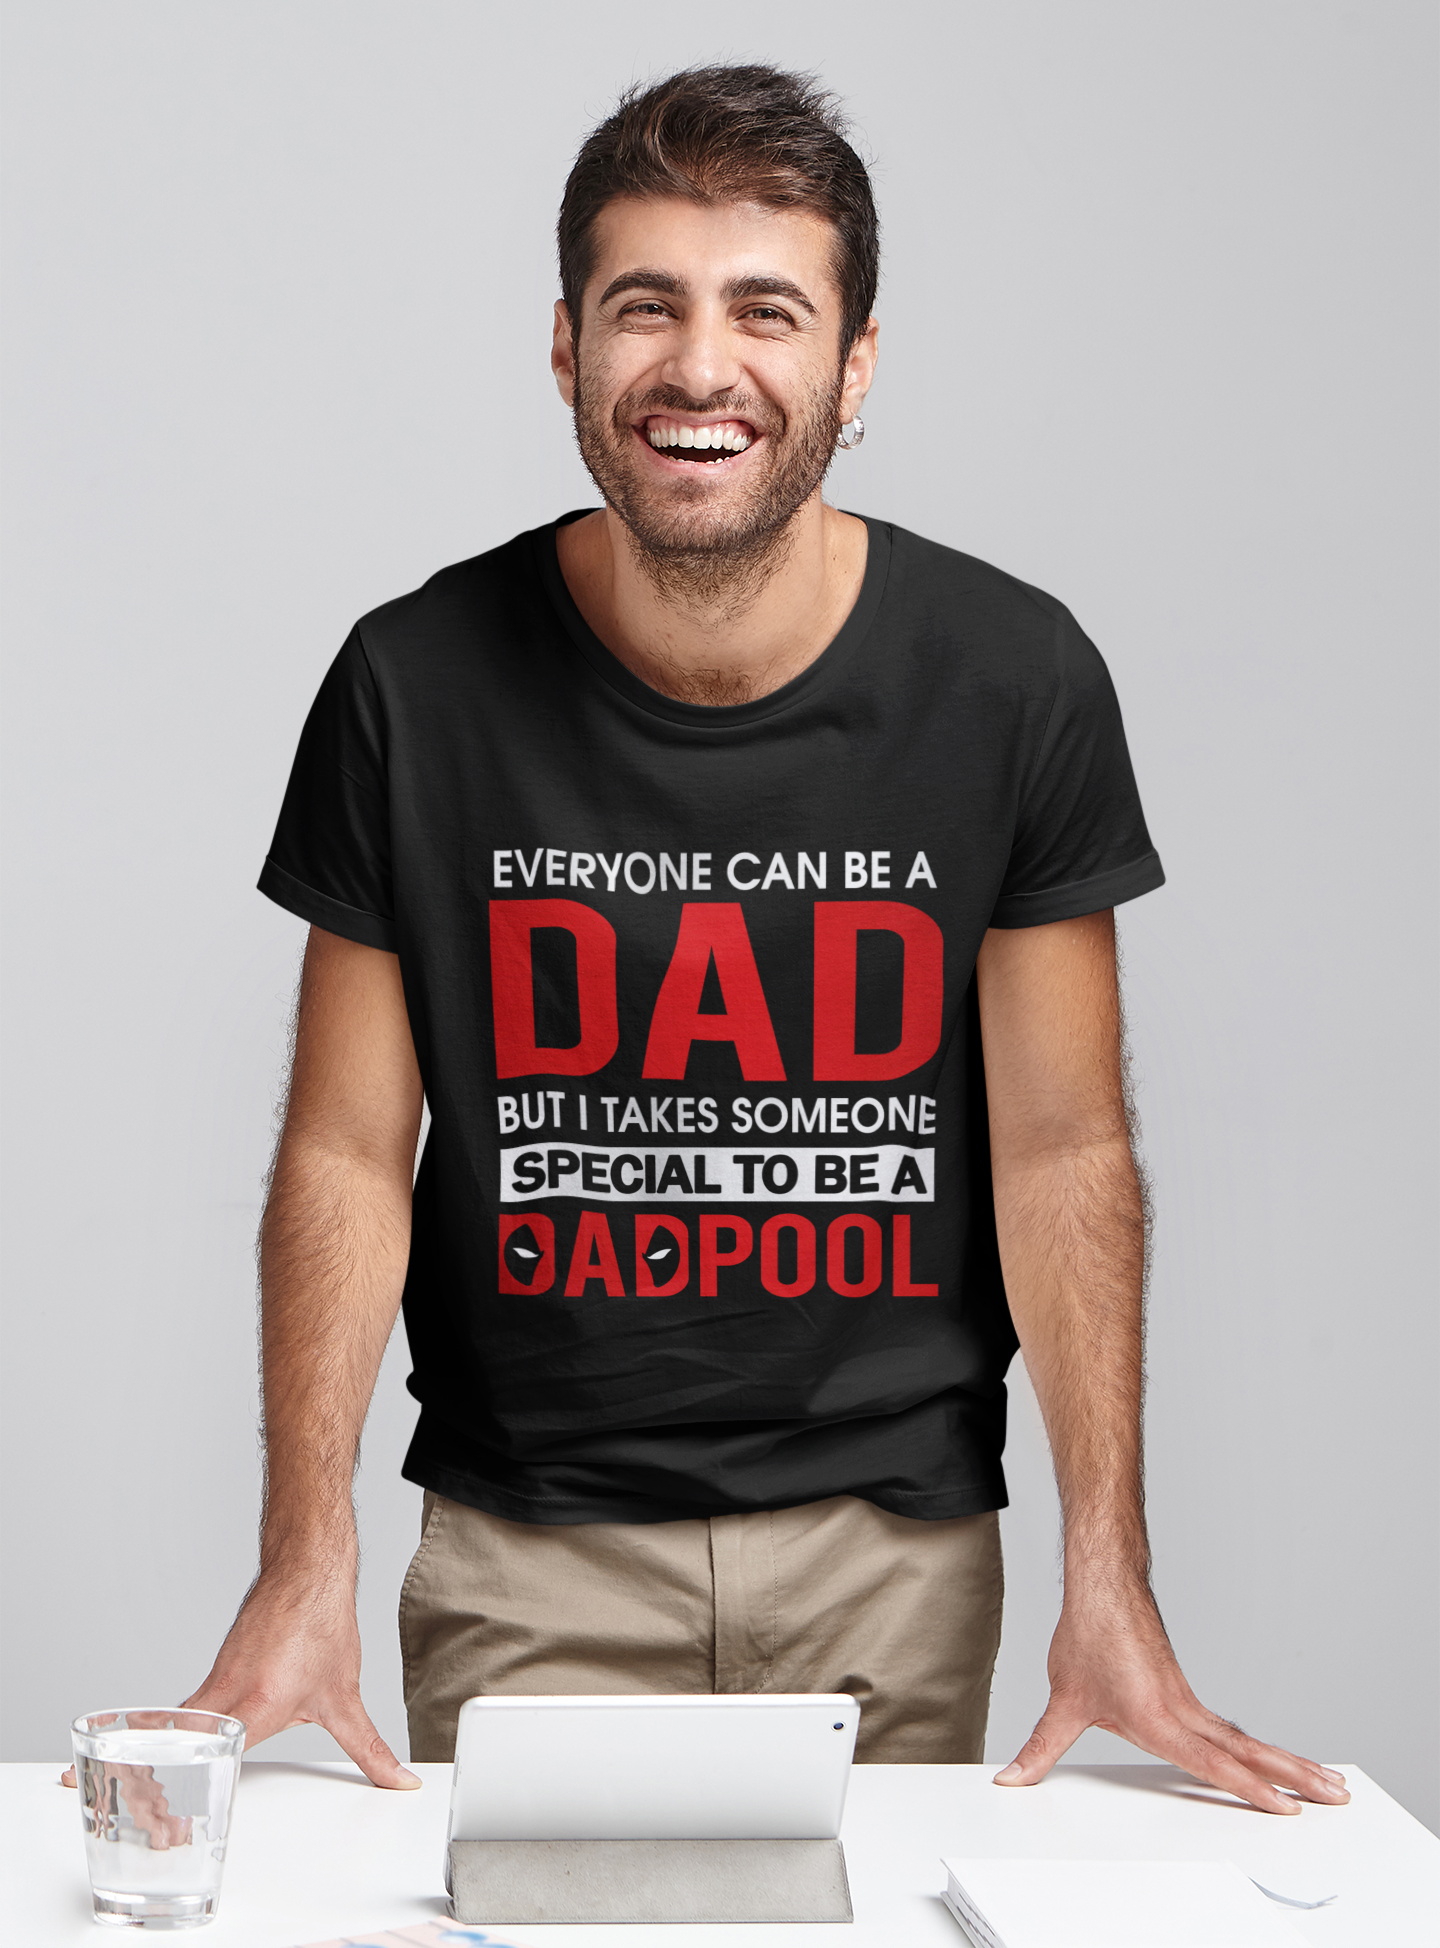 Deadpool T Shirt, I Takes Someone Special To Be A Dadpool Tshirt, Superhero Deadpool T Shirt, Fathers Day Gifts